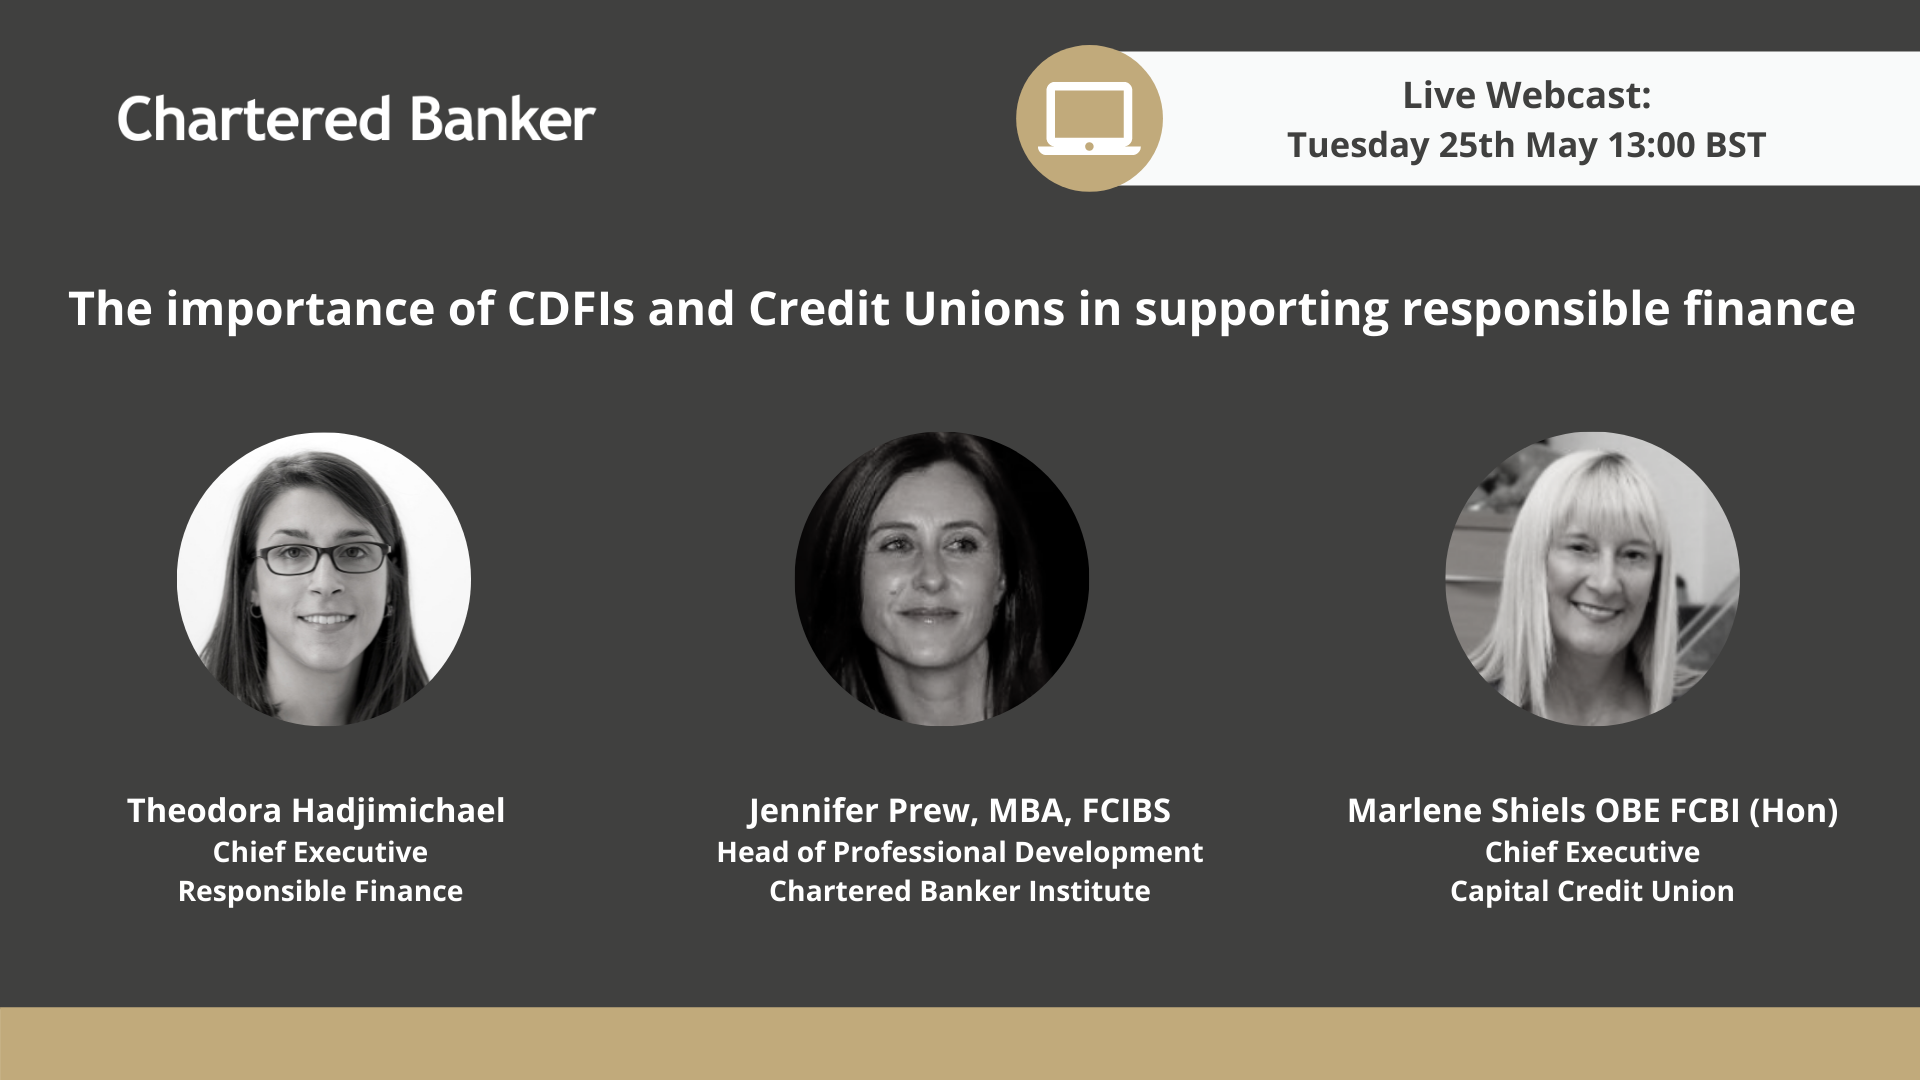 The importance of CDFIs and Credit Unions in supporting responsible finance